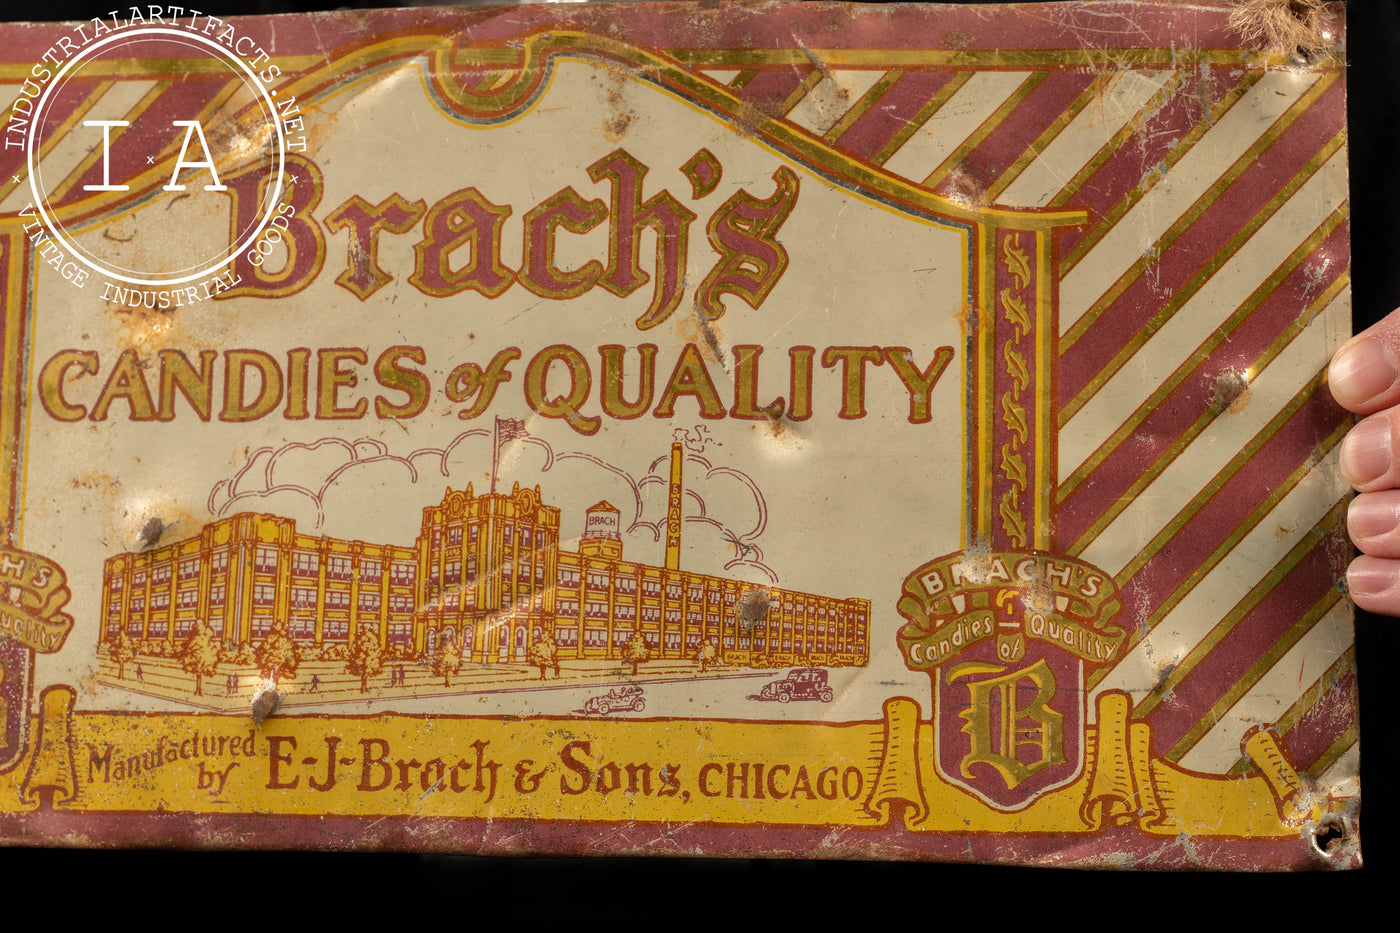 Early 20th Century Brach's Candy Sign